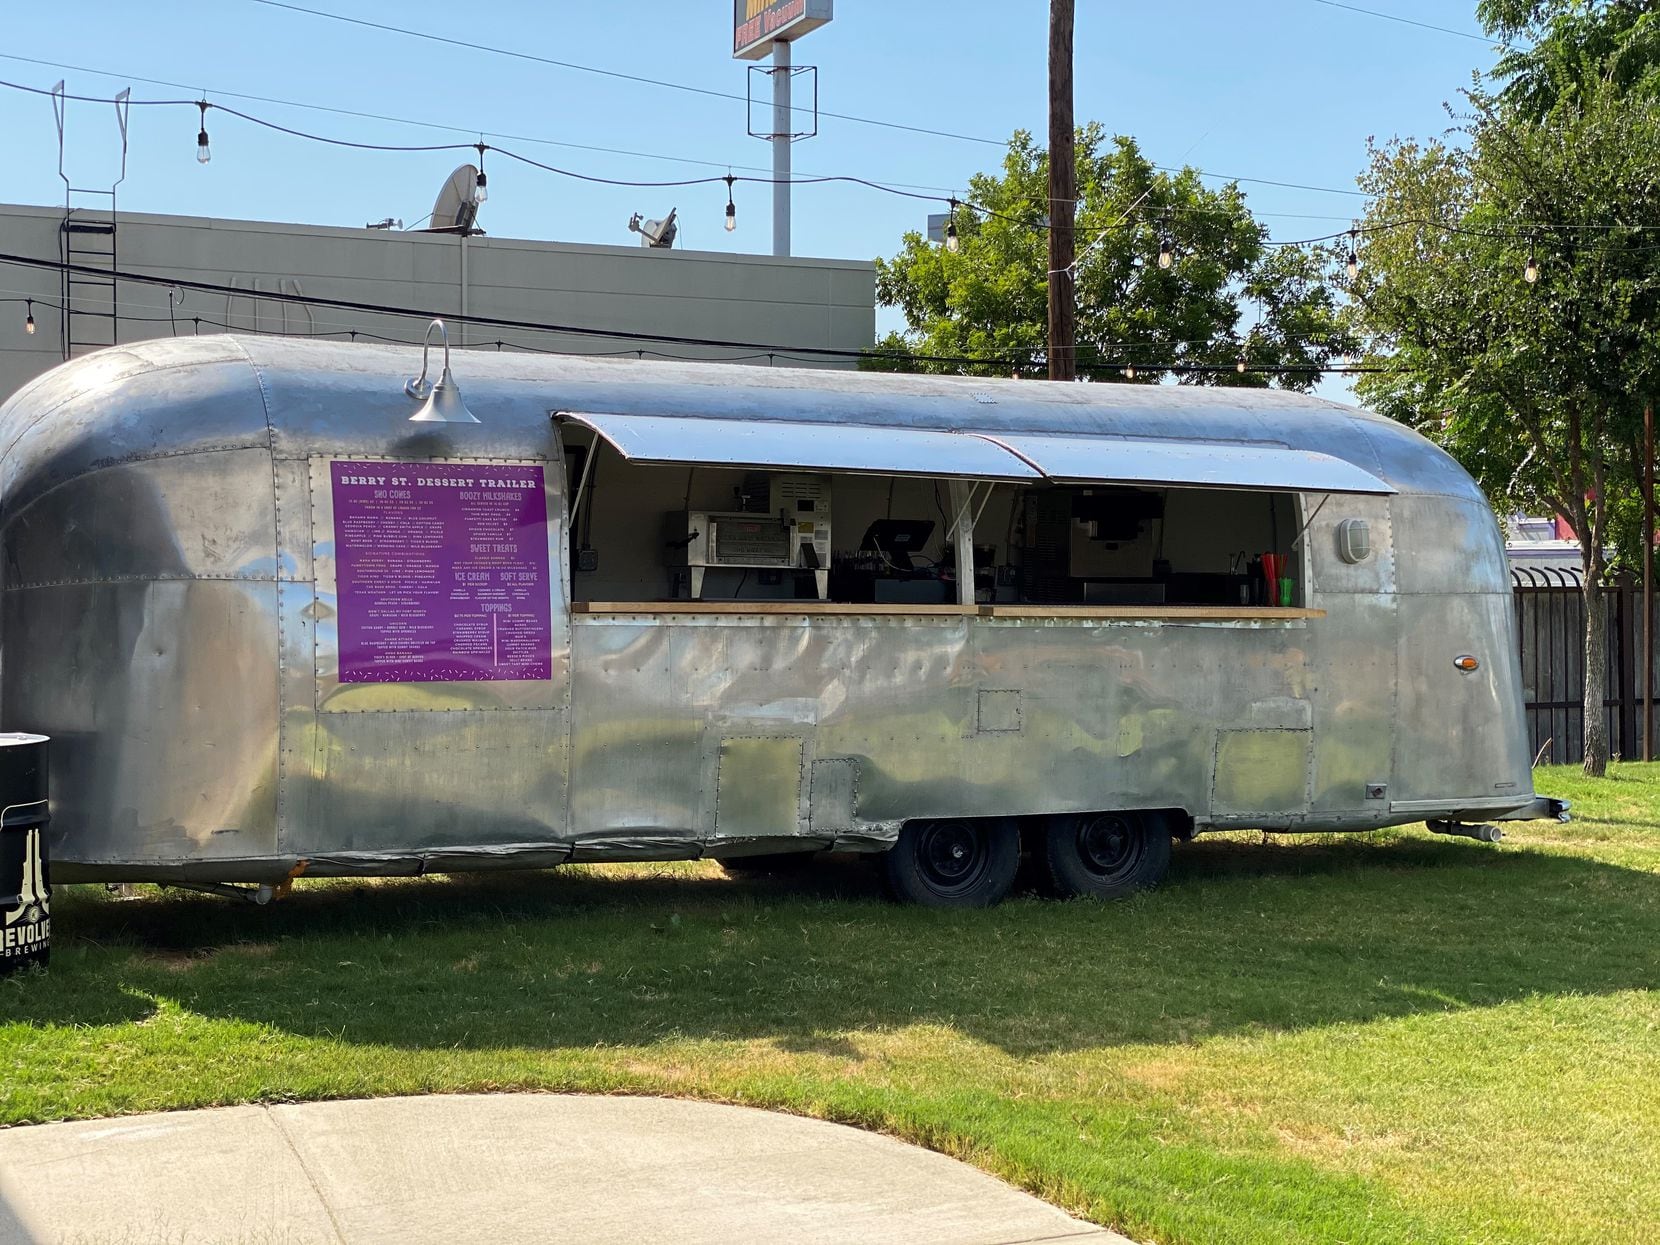 There's a dessert trailer in the backyard of Berry Street Ice House.